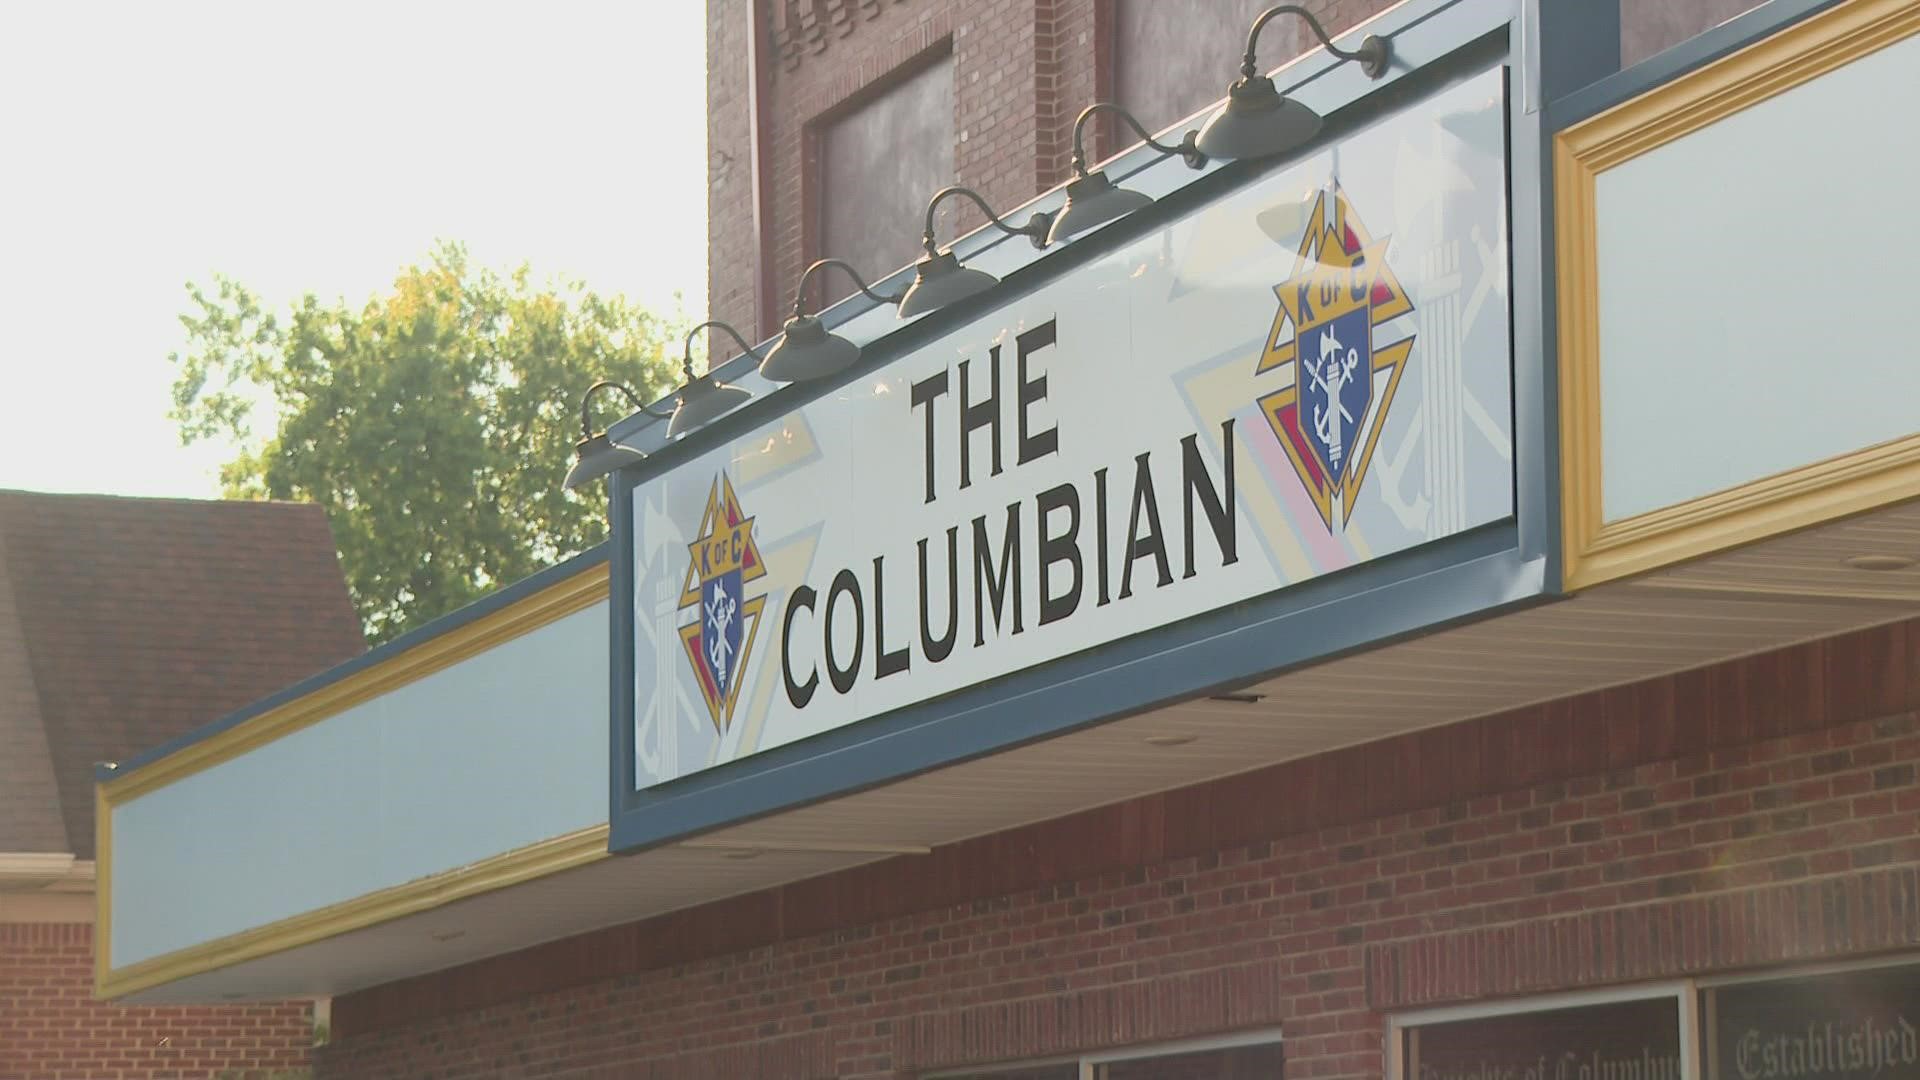 The old Catholic Community Center on East Main Street, recently known as a home to the Knights of Columbus, is being restored.